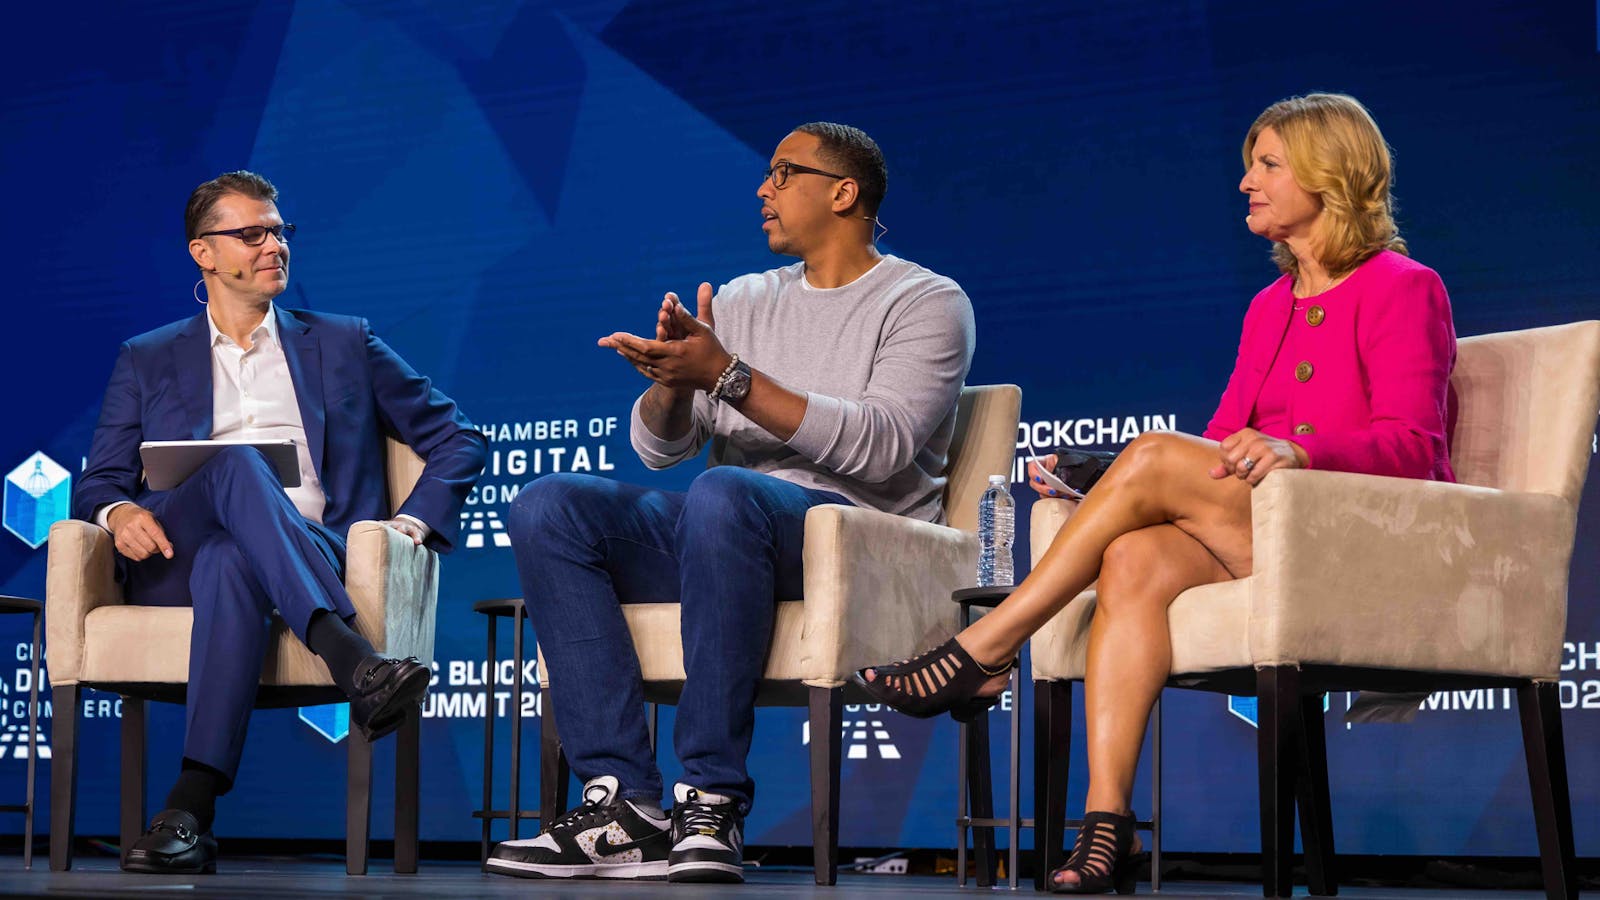 An interview with NBA player Channing Frye (center) and Alison Kutler, former Dapper Labs senior vice president of global government affairs (right). Photo via Dapper Labs/Chamber of Digital Commerce.